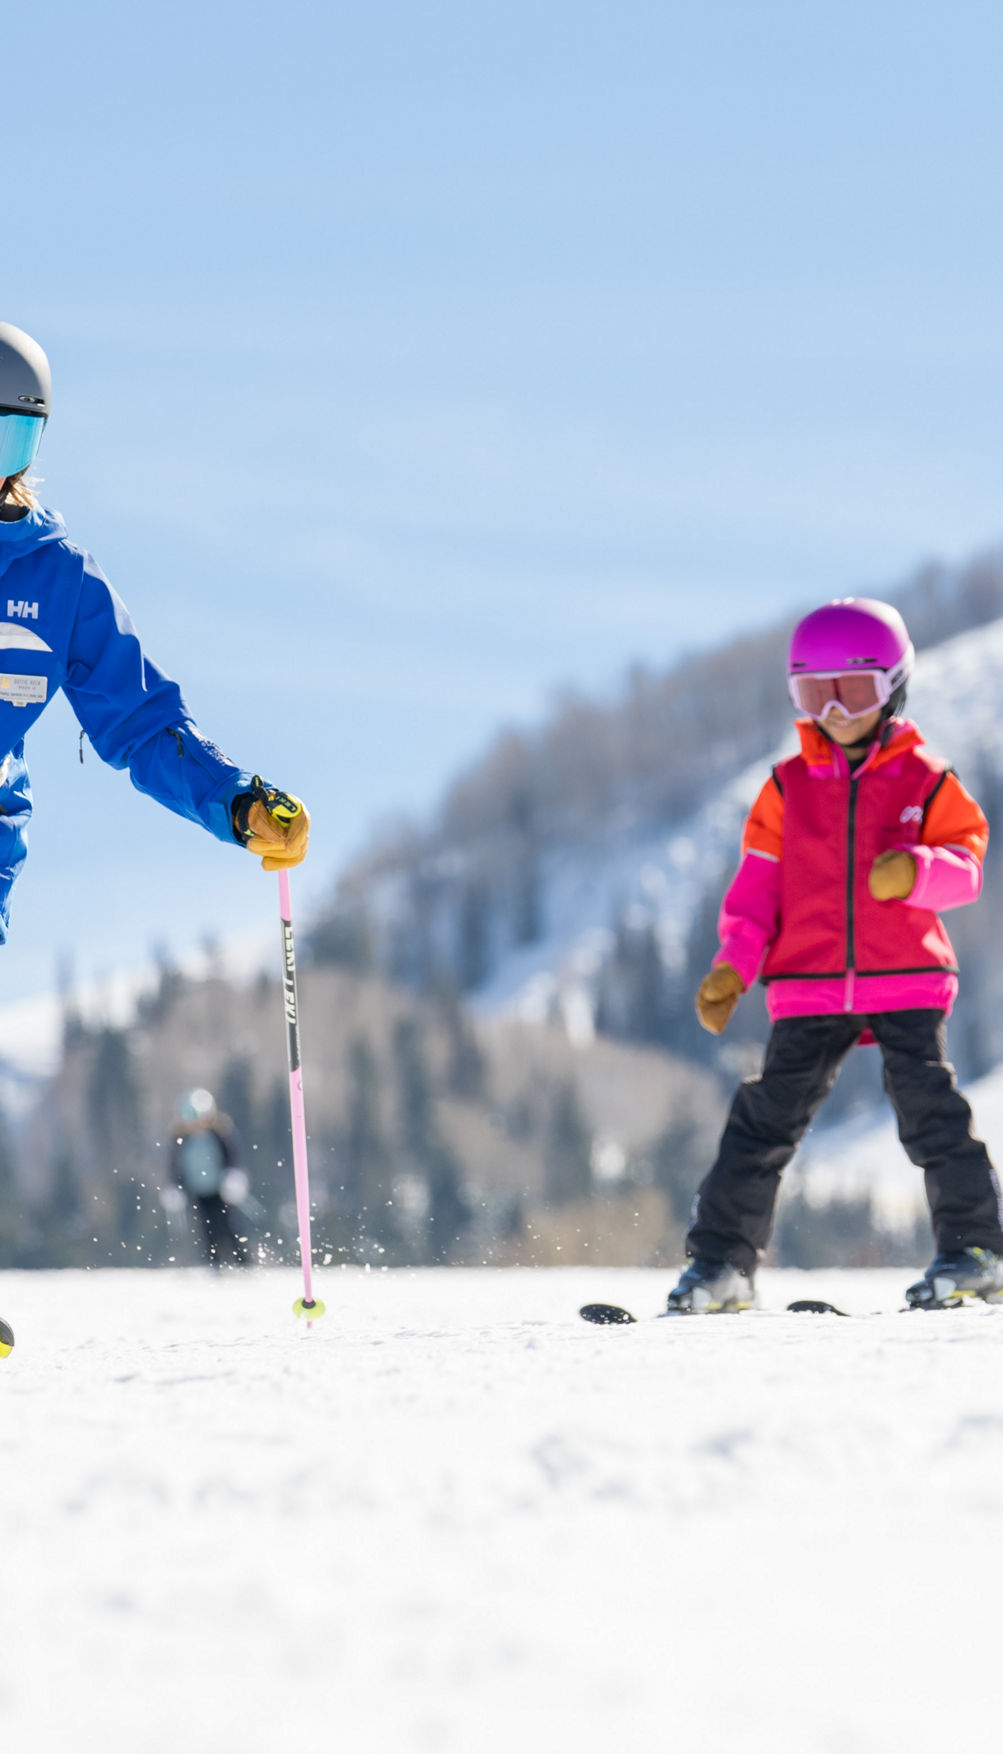 Utah Skiing Learning Products – Ski Teaching Products